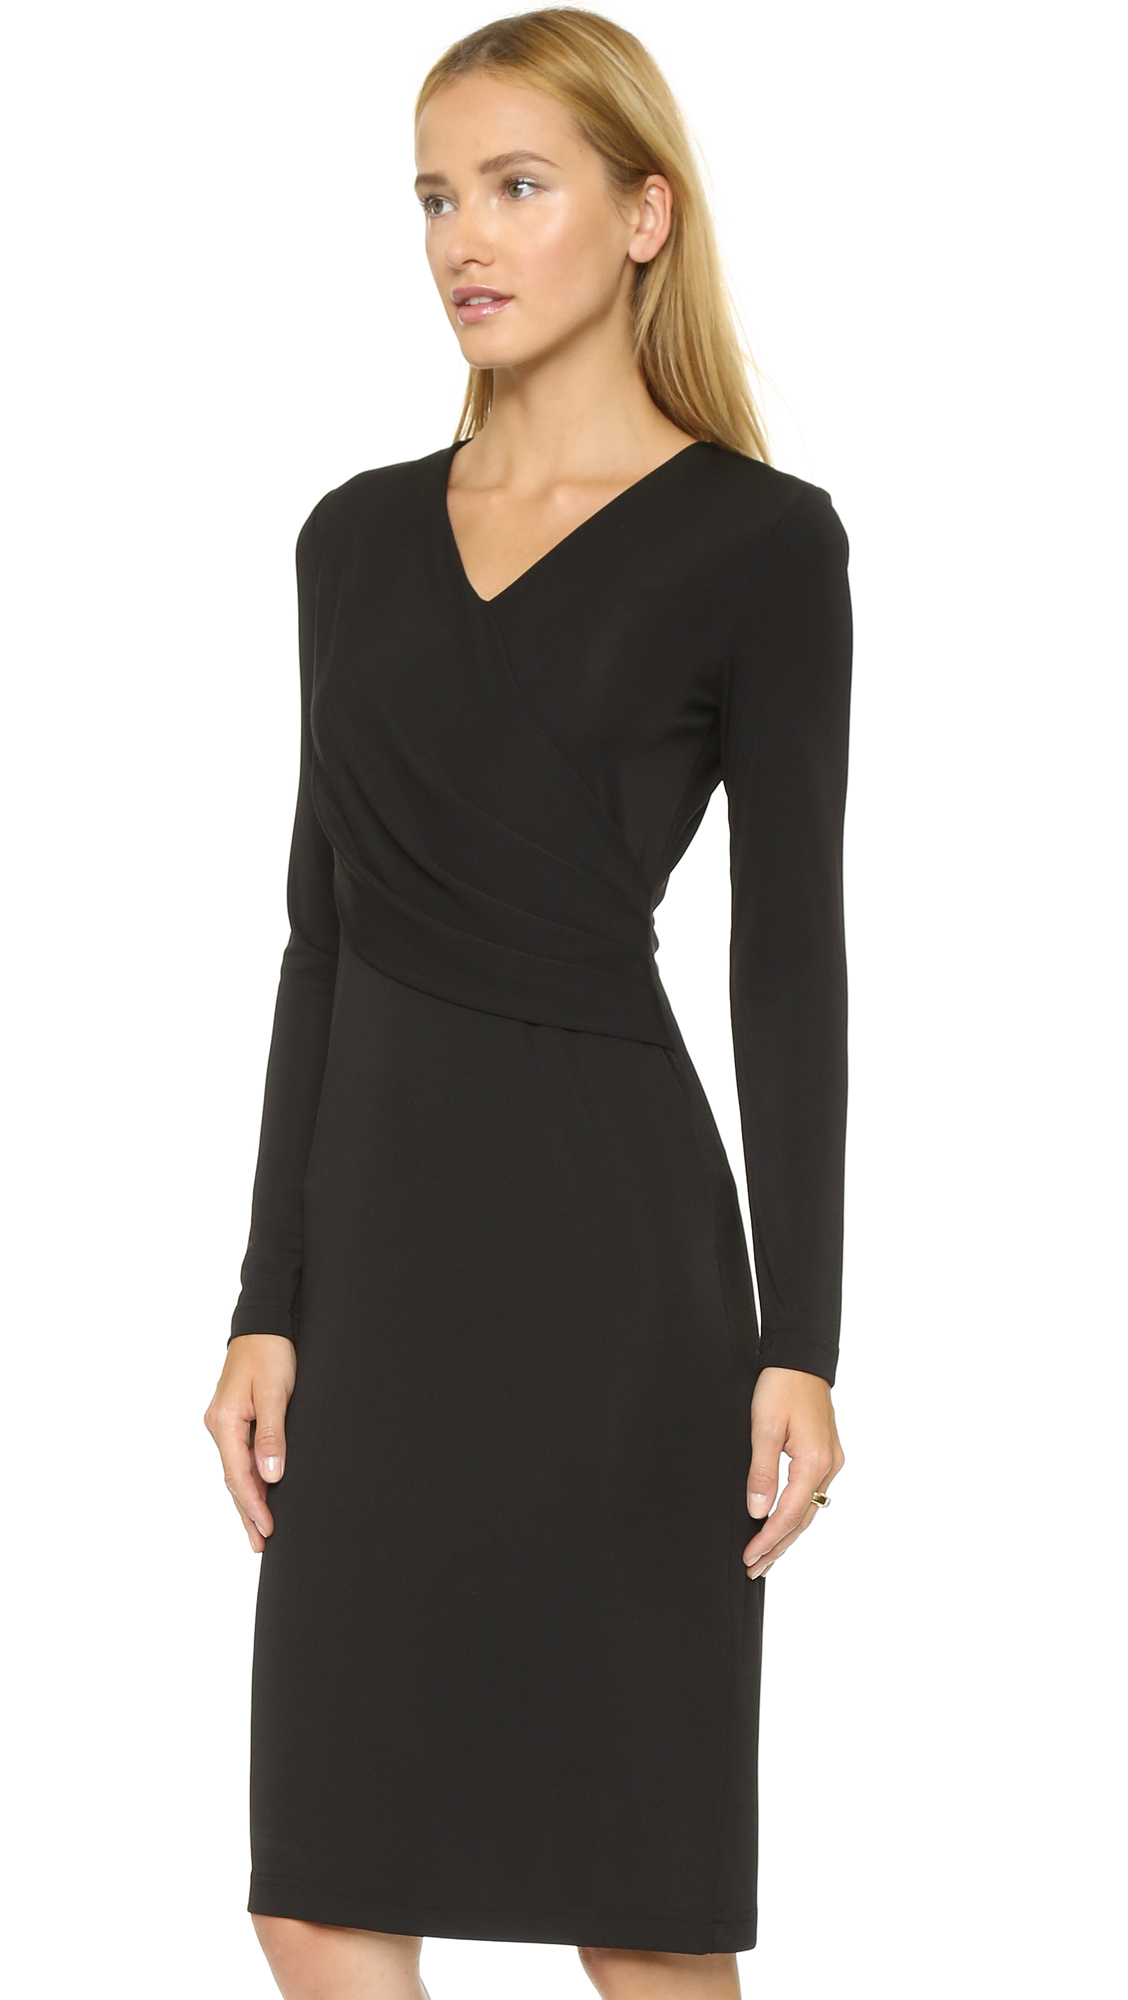 v neck wrap dress with sleeves